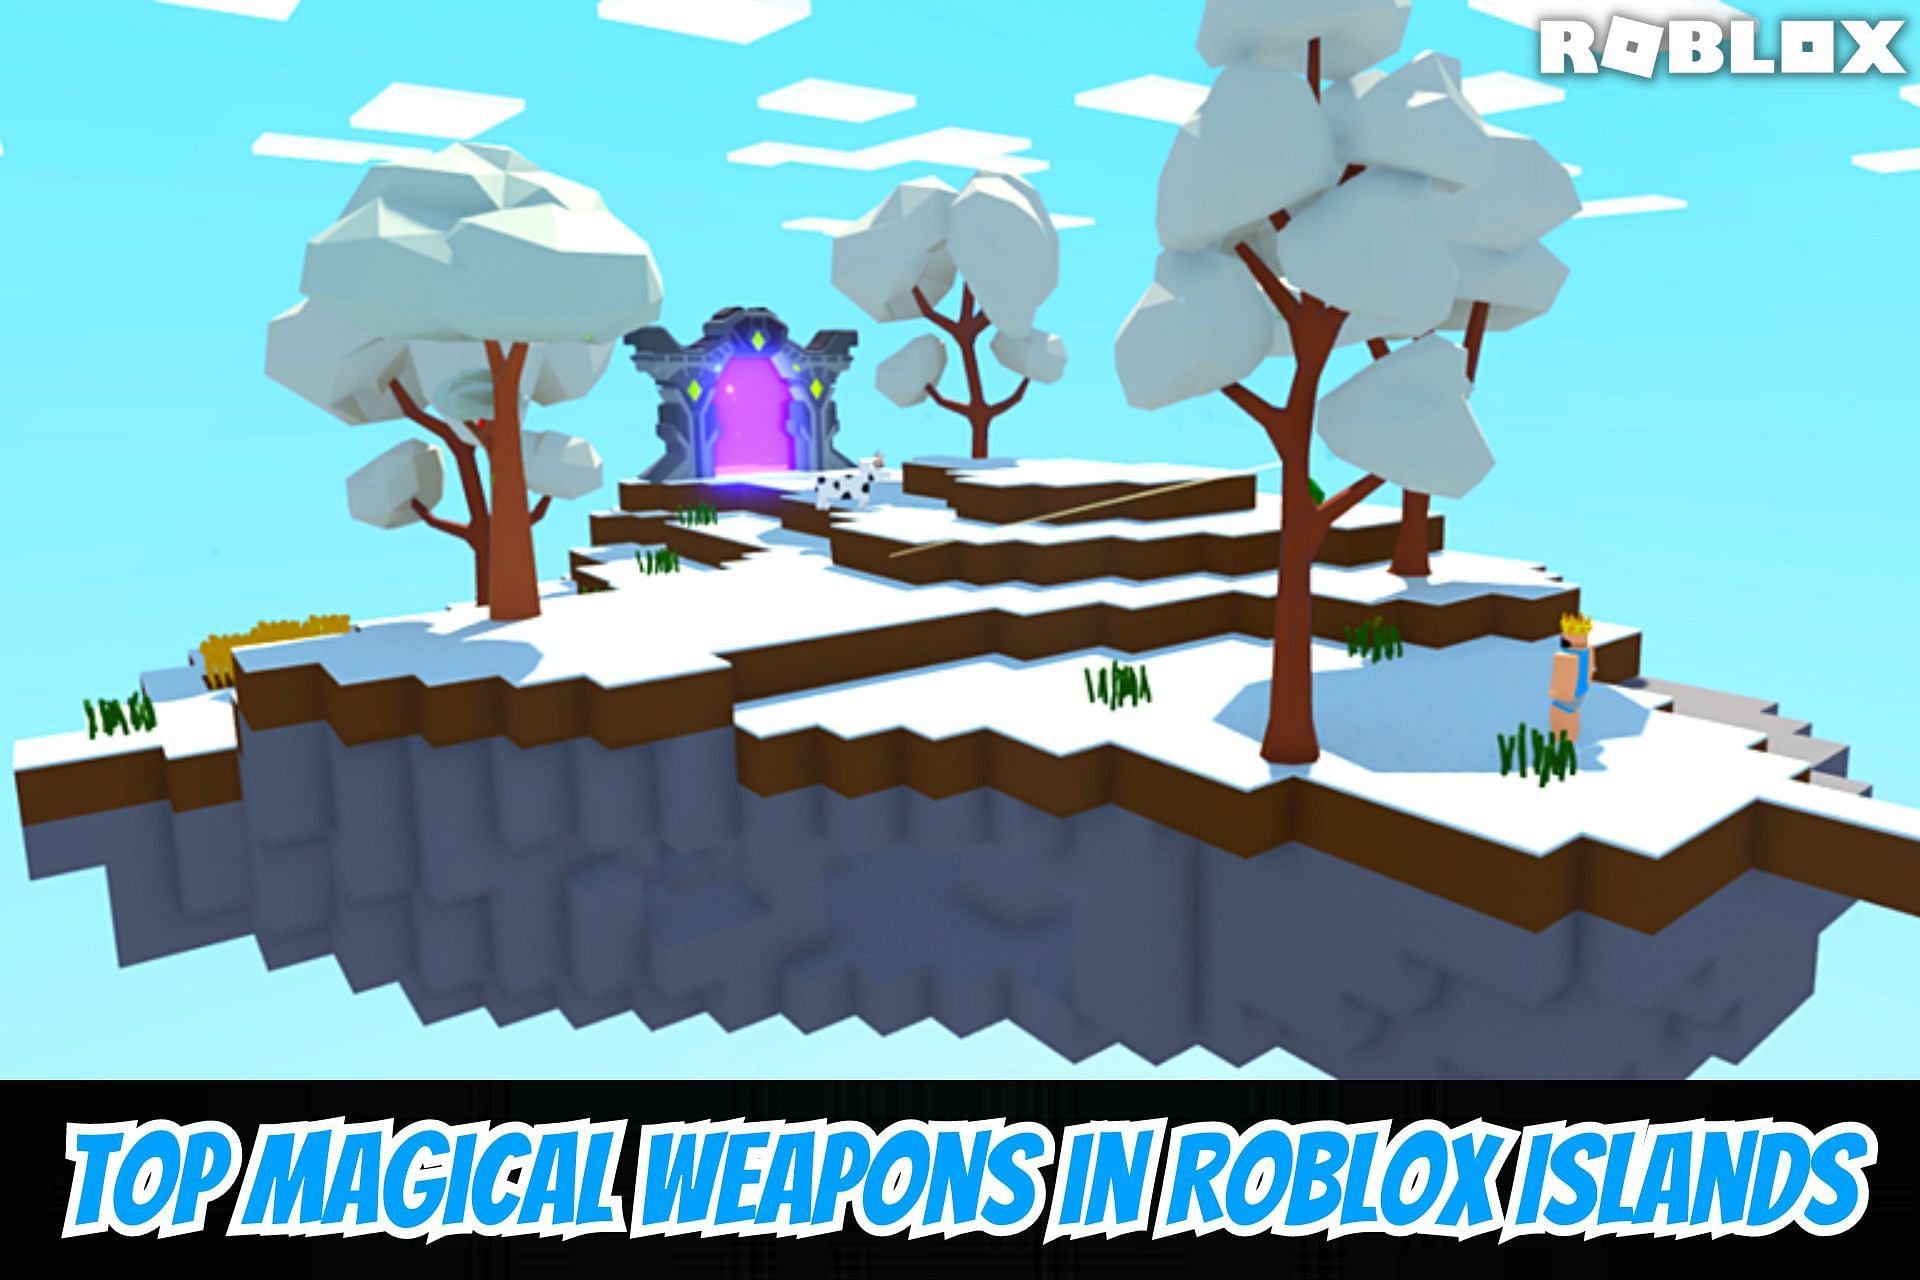 5 best magical weapons in Roblox Islands